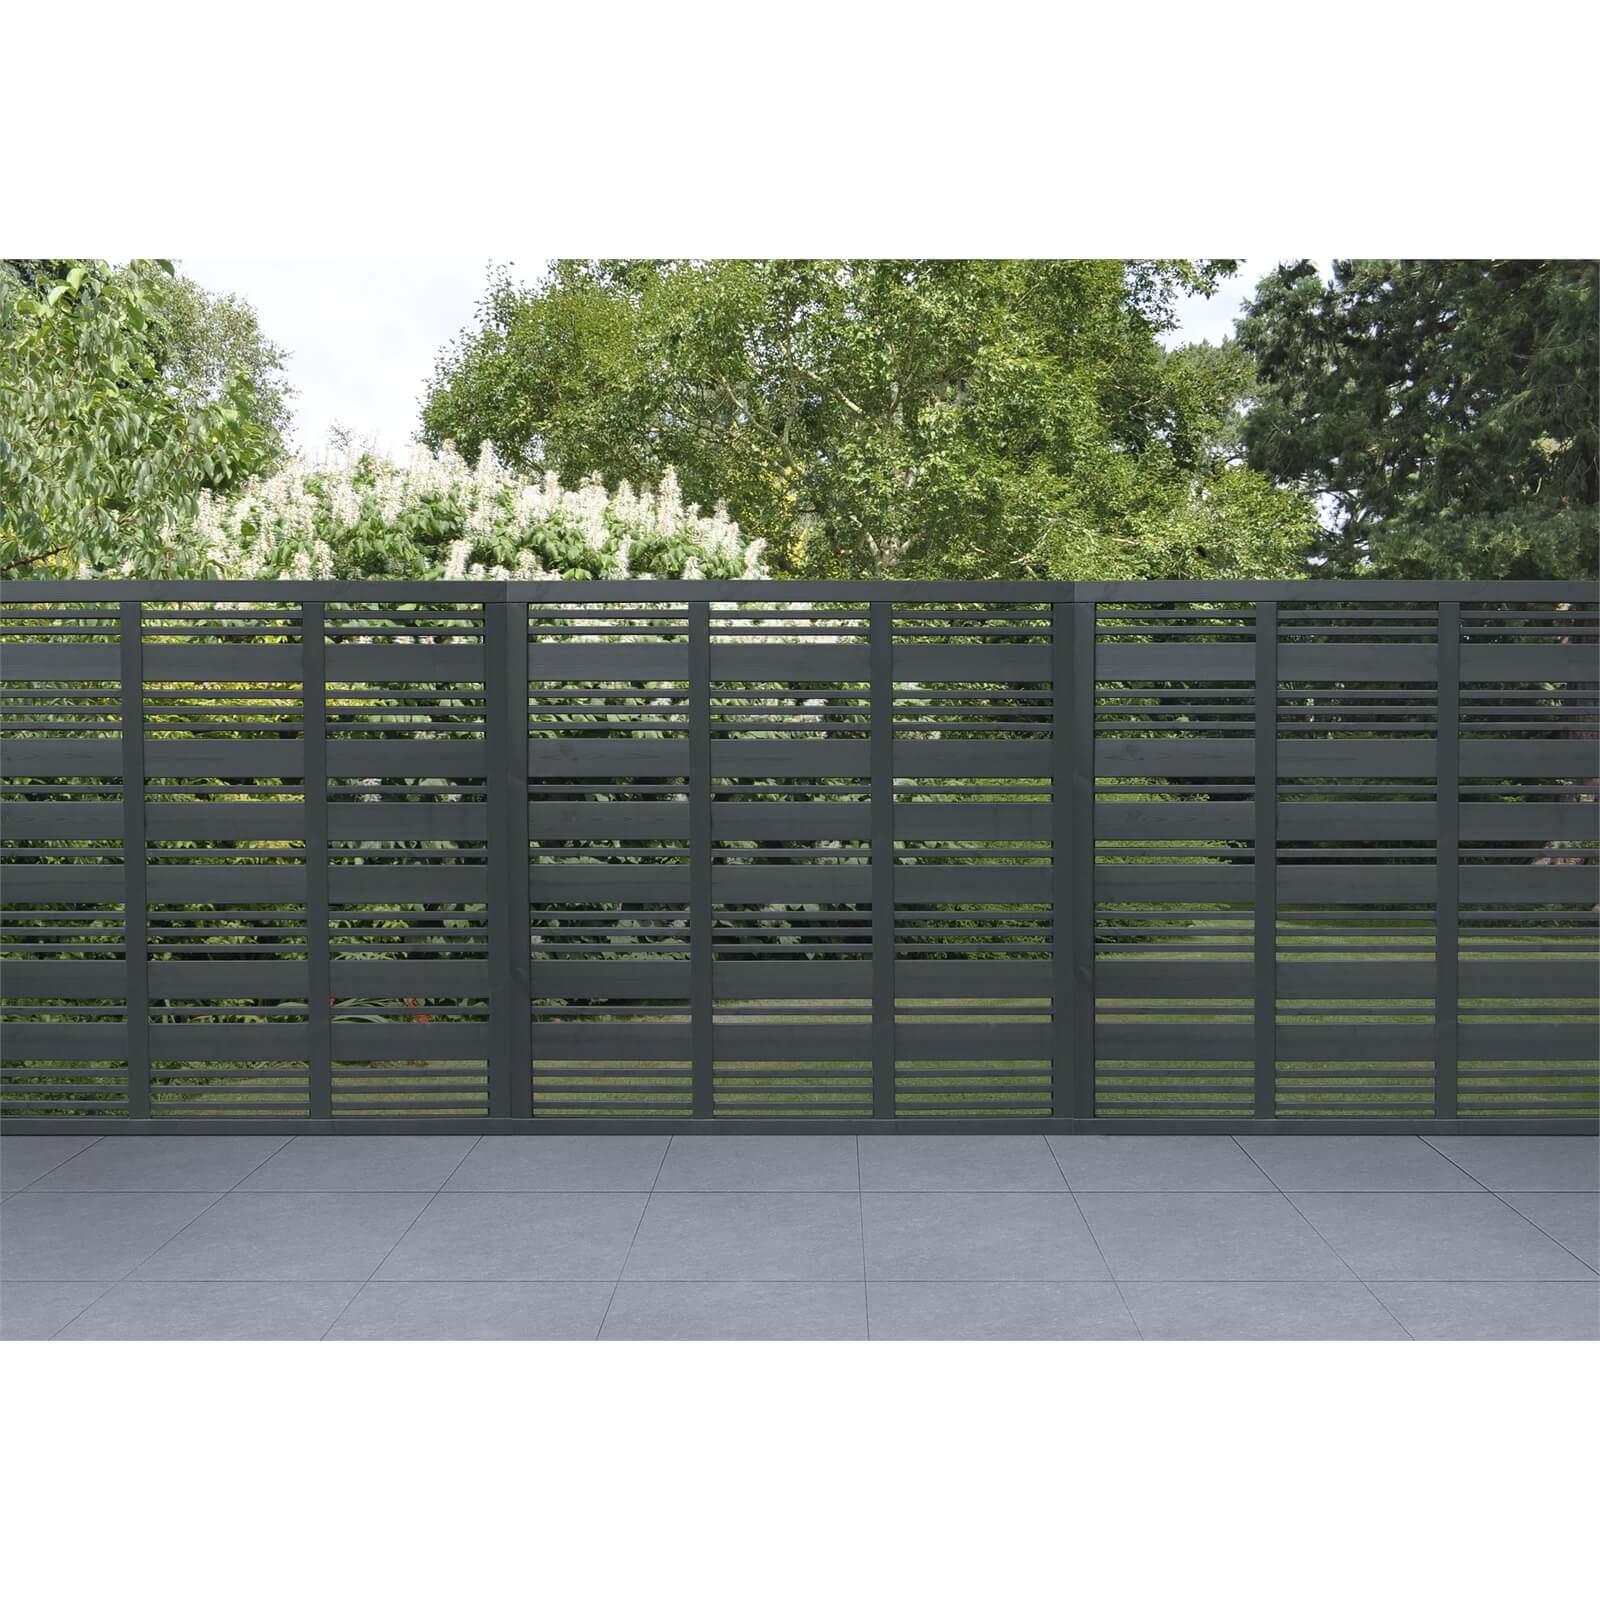 6ft x 6ft (1.8m x 1.8m) Grey Painted Contemporary Mix Slatted Fence Panel - Pack of 5